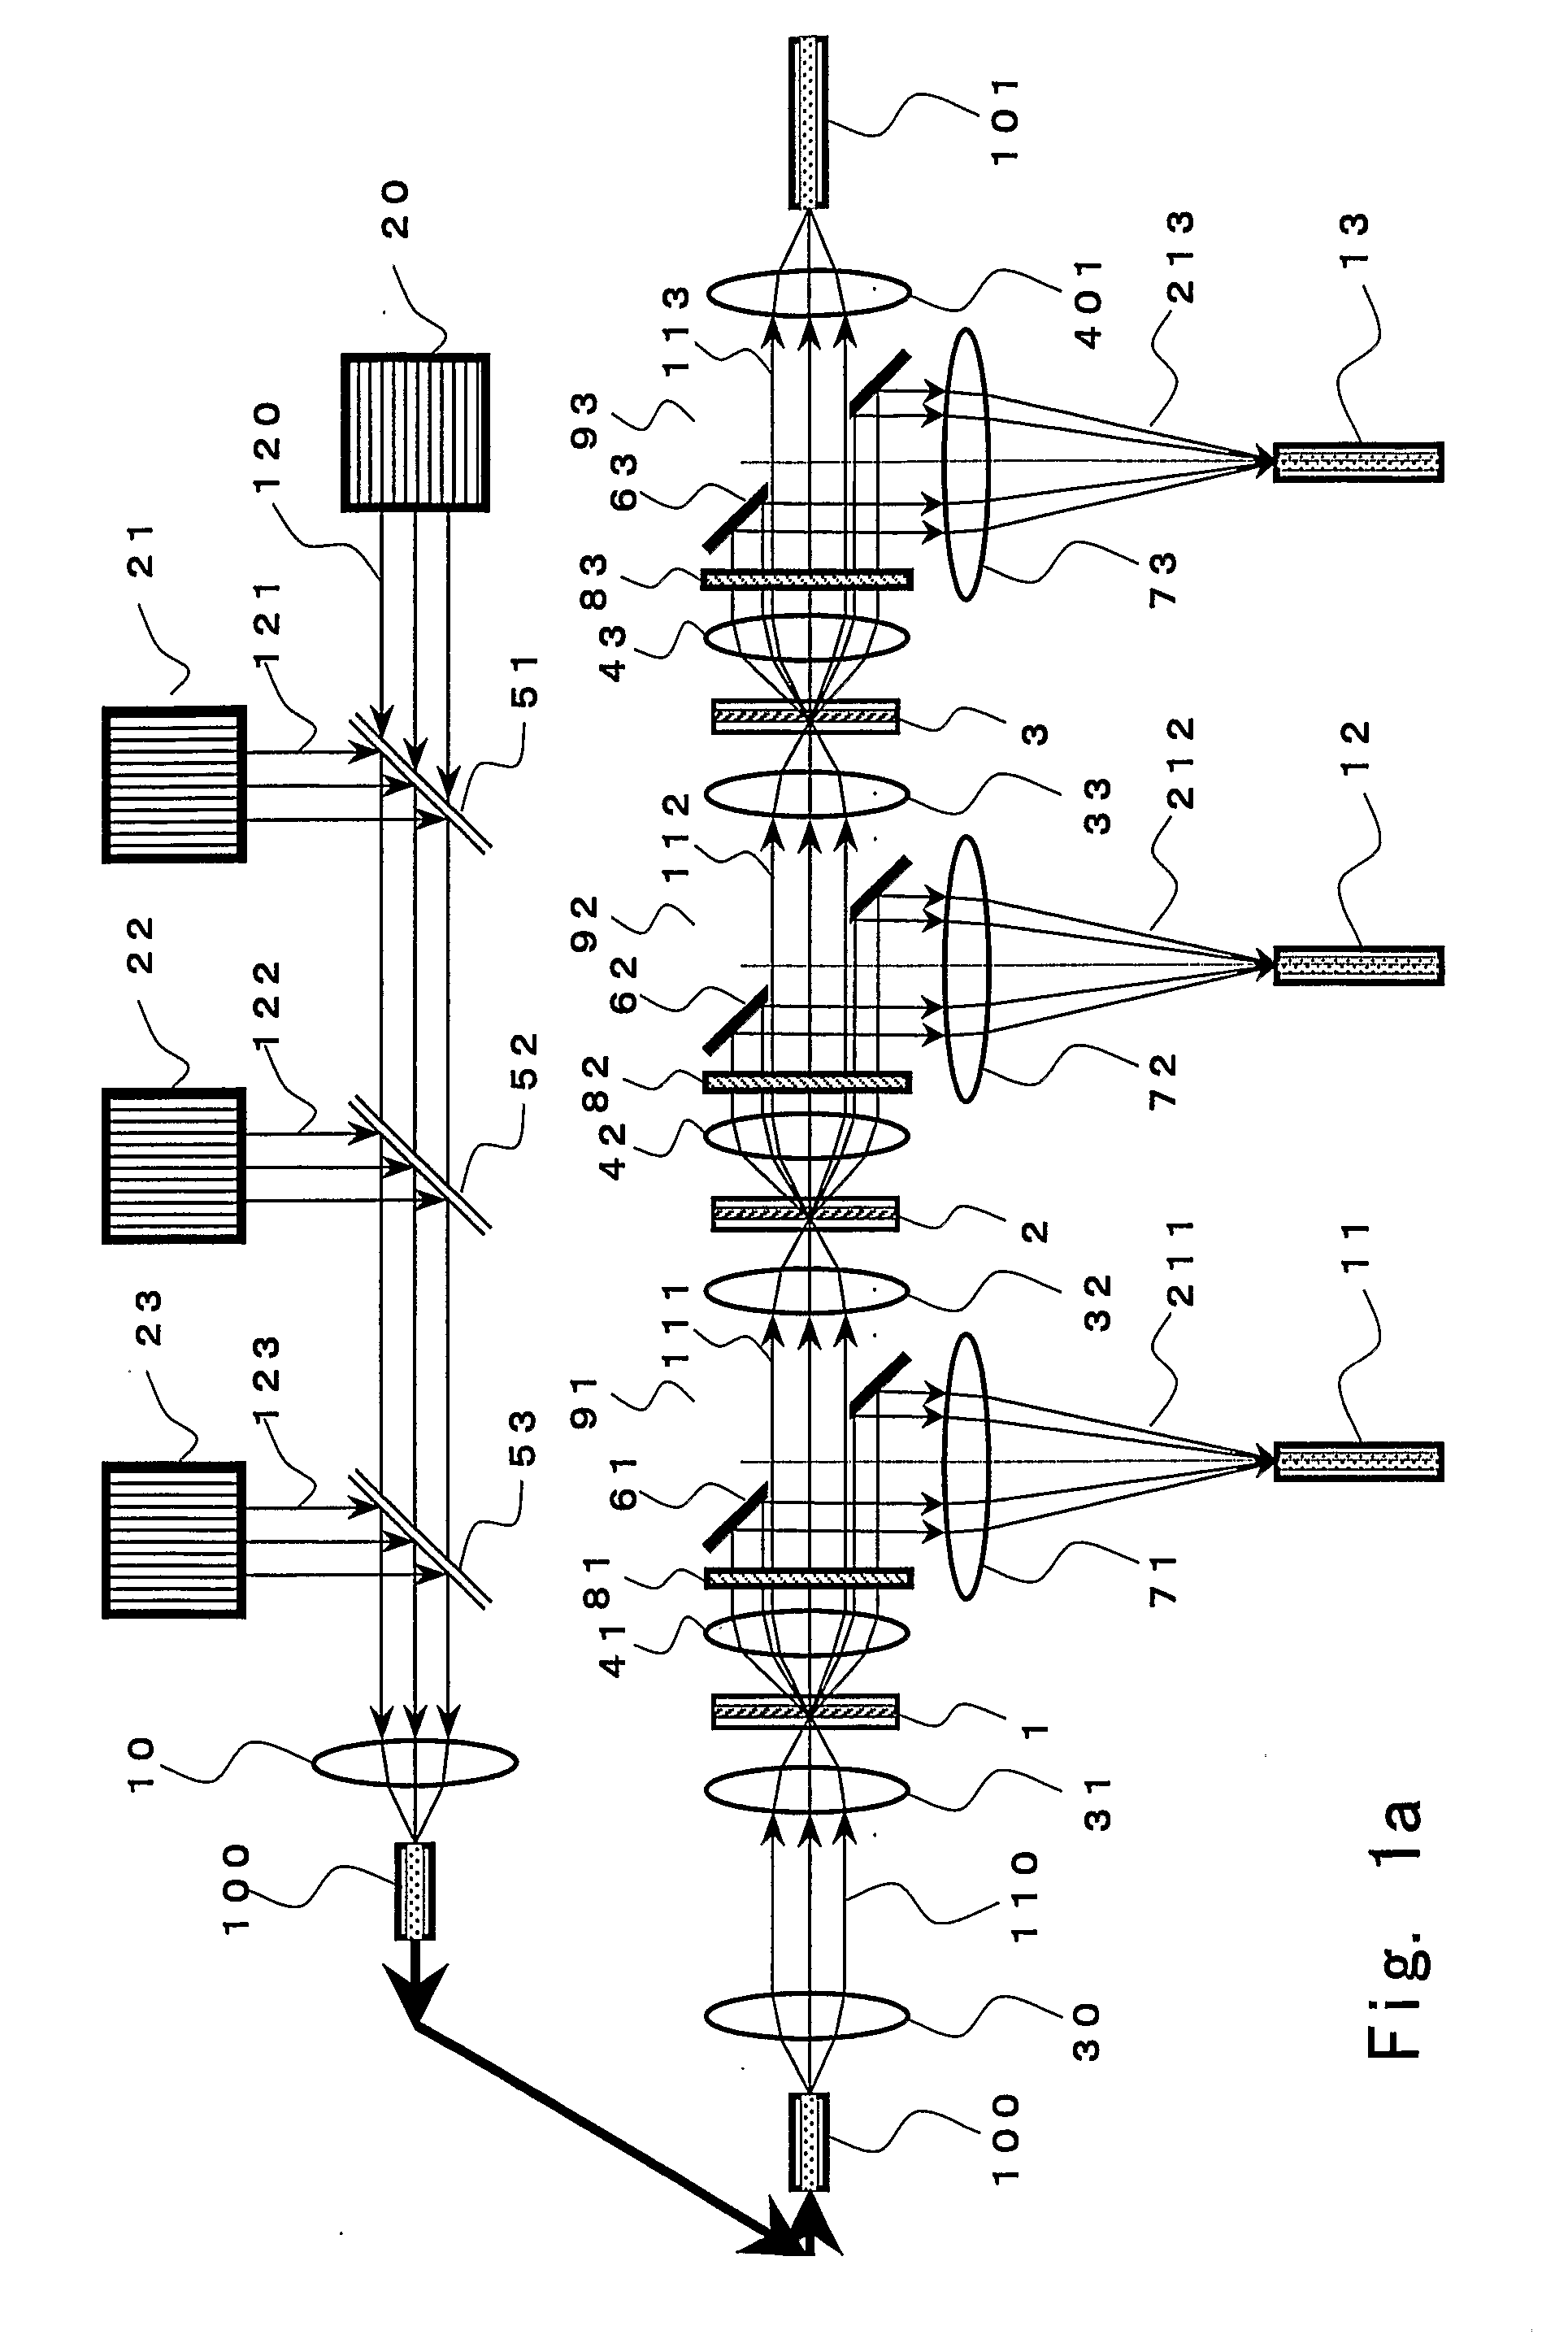 Optically controlled optical-path-switching apparatus, and method of switching optical paths